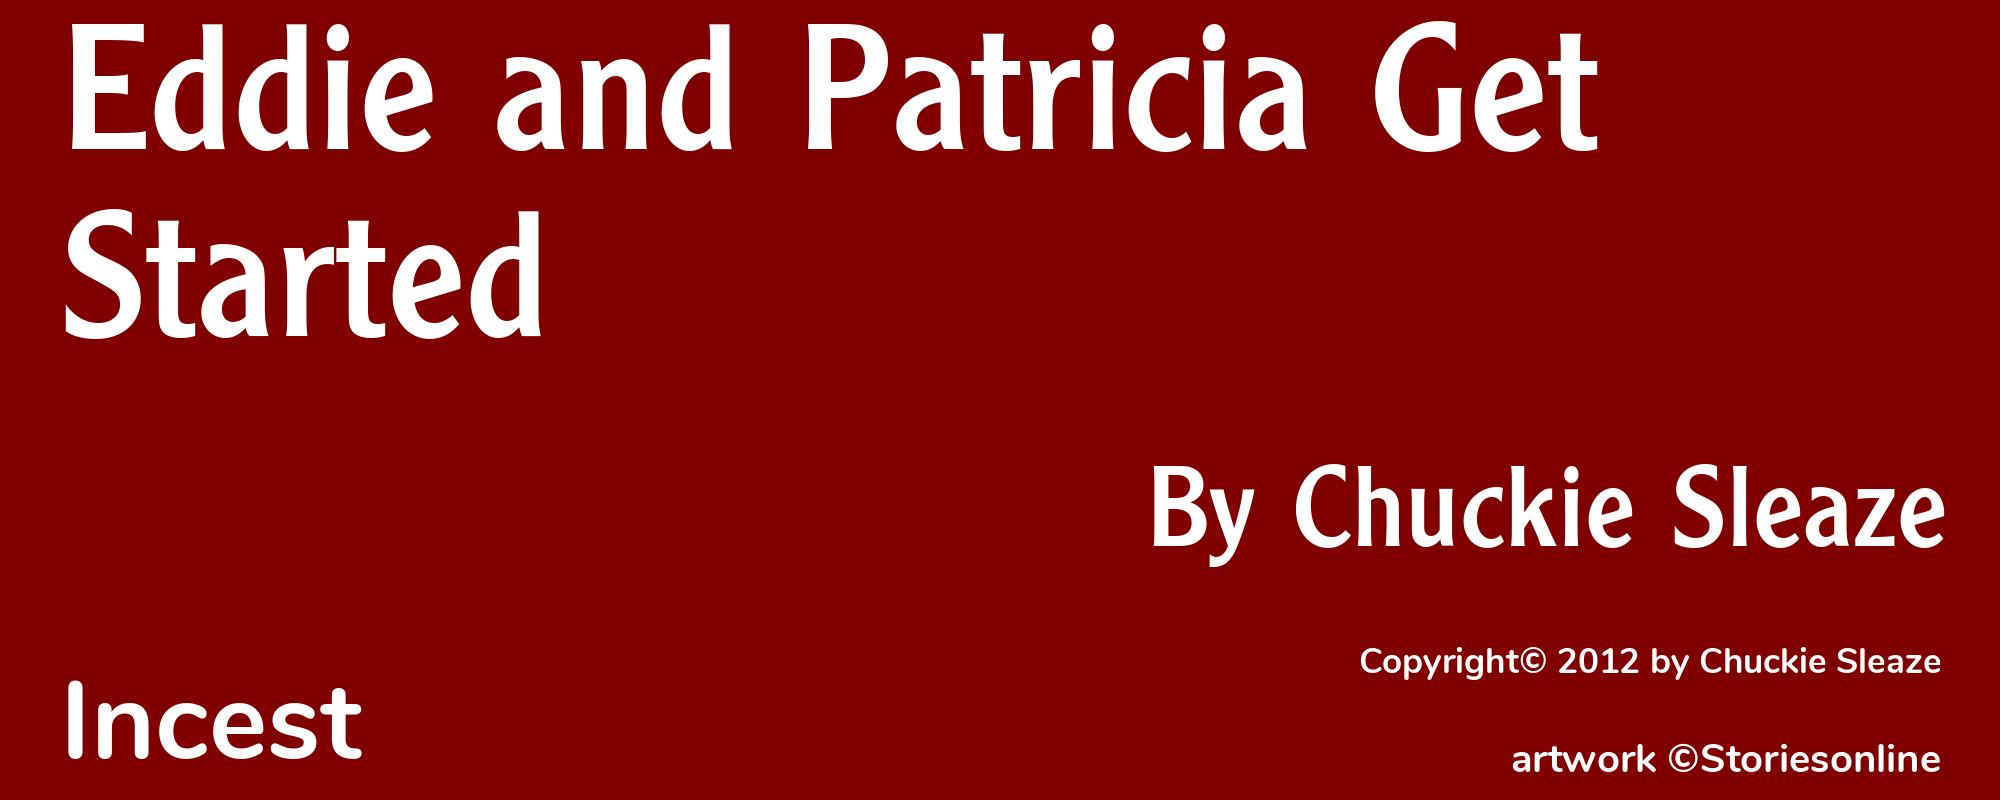 Eddie and Patricia Get Started - Cover